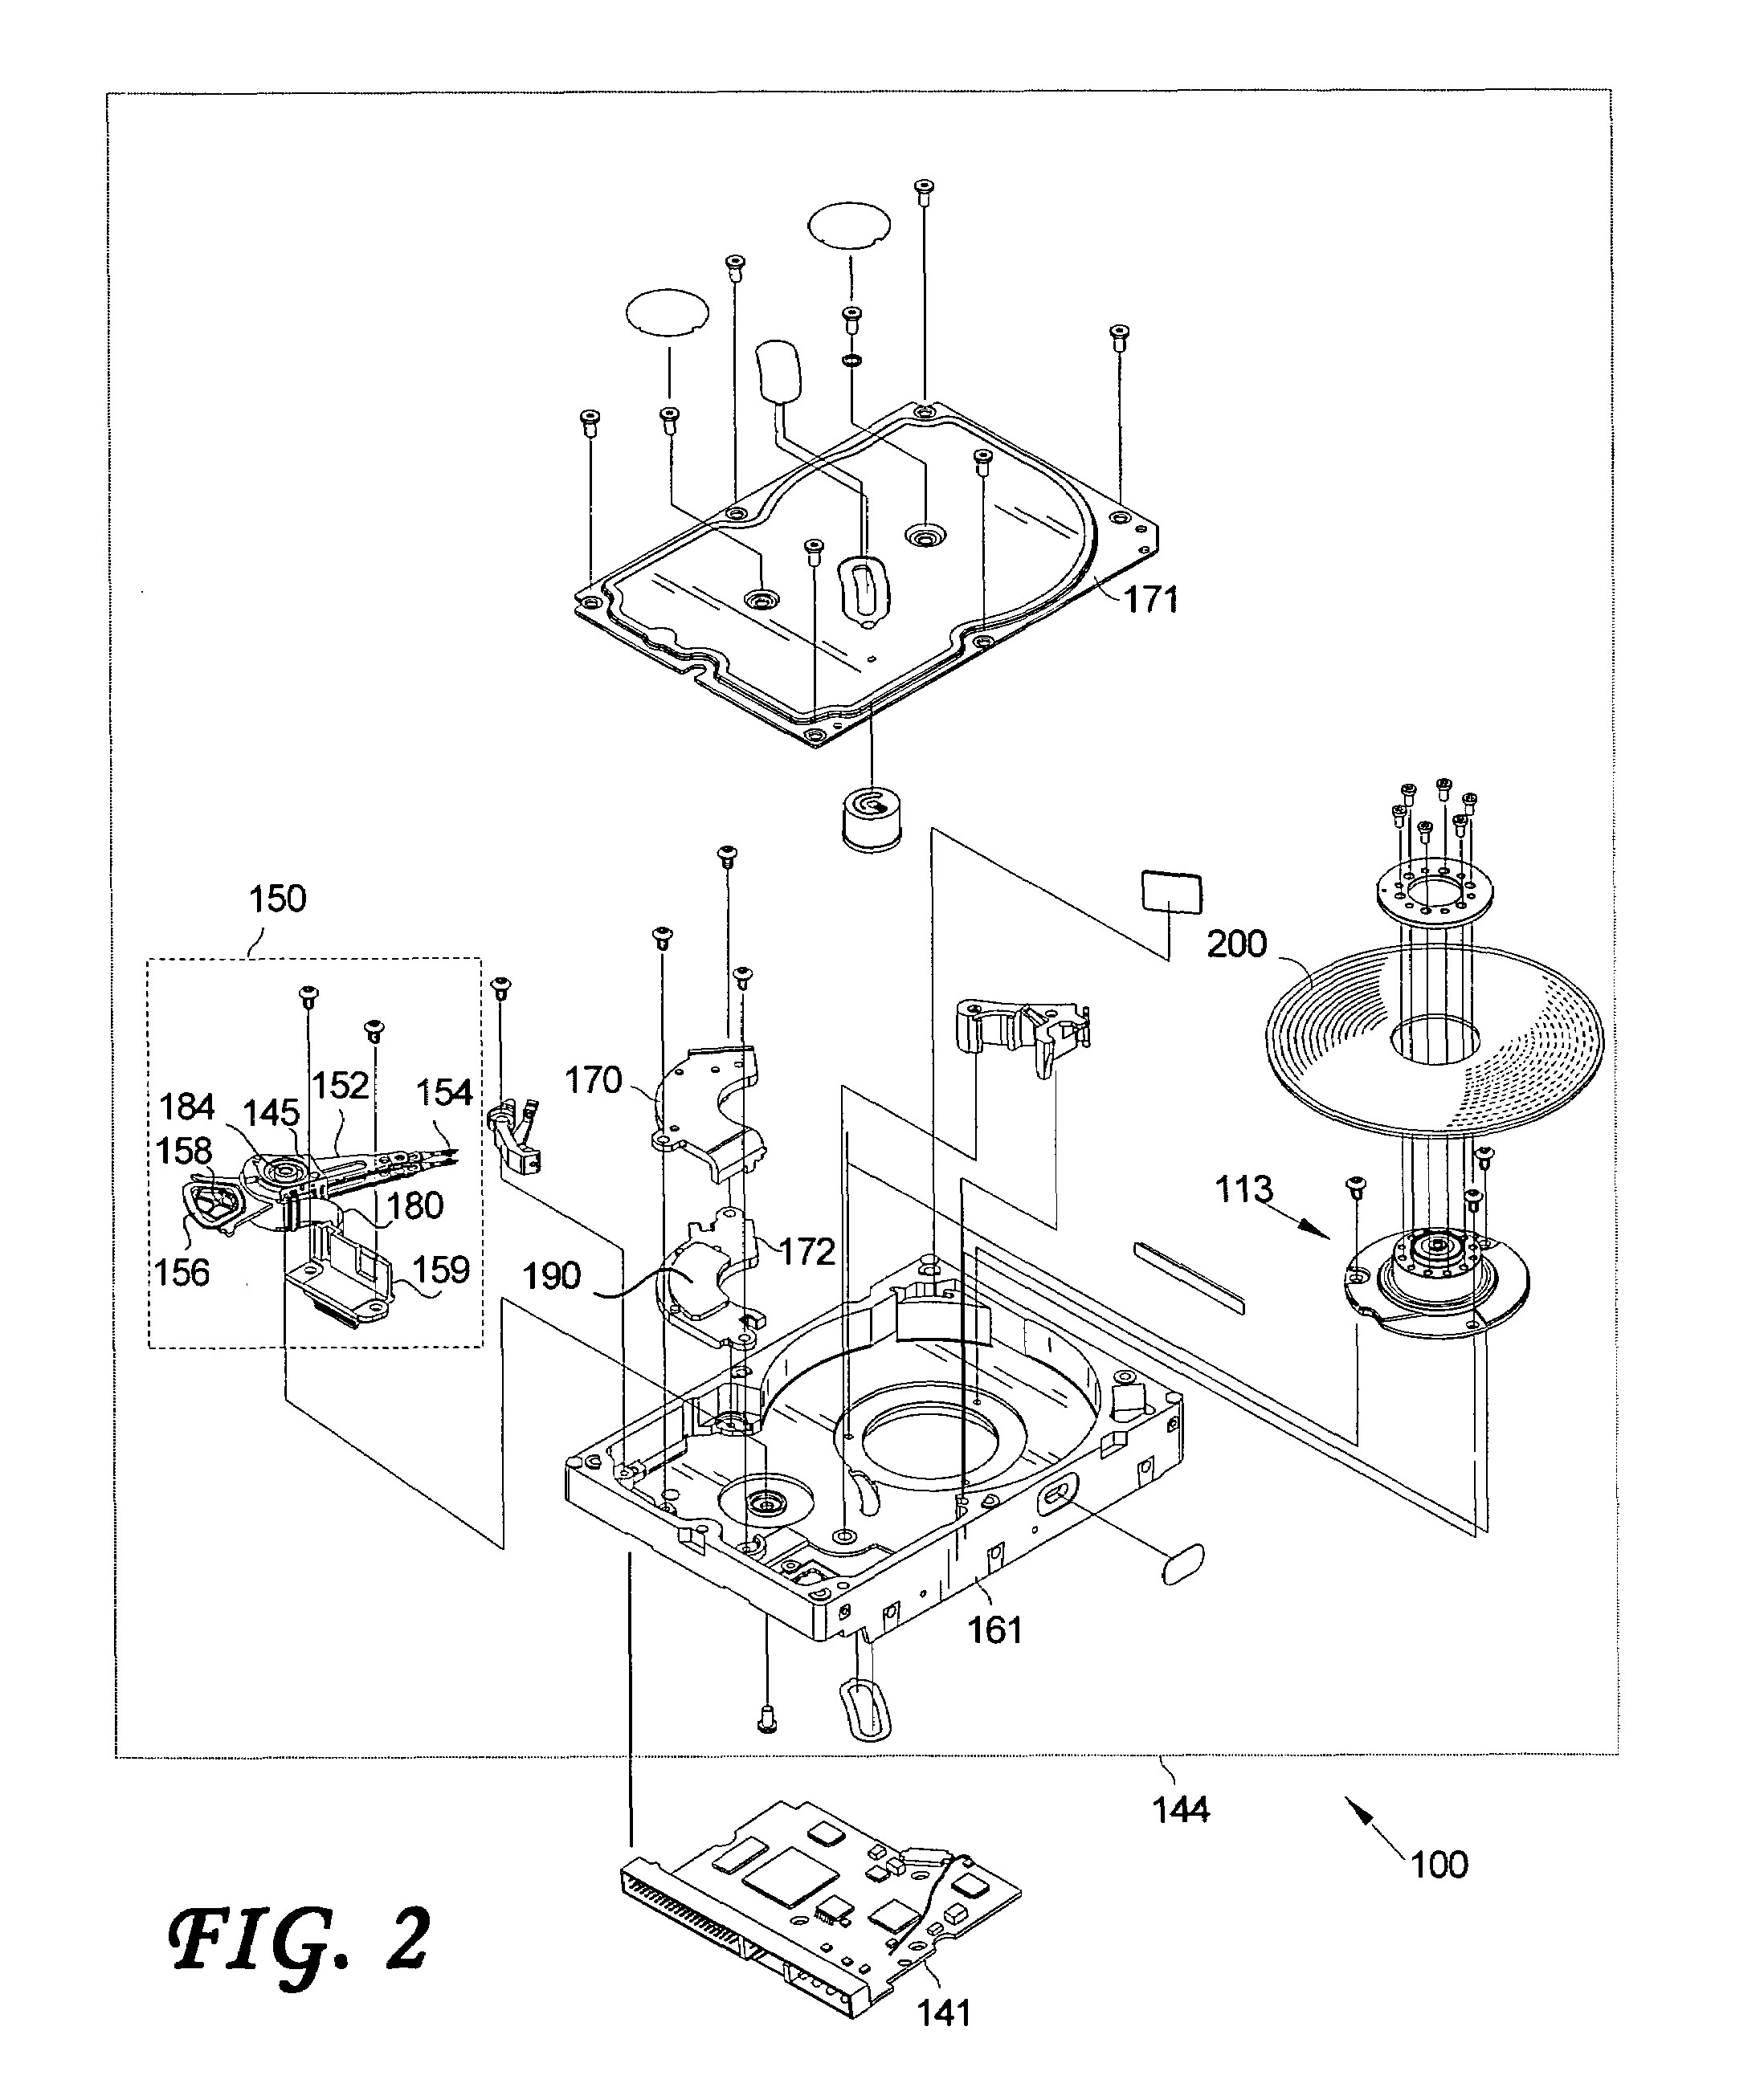 Disk drive having adaptively-sized sectors to compensate for disk eccentricity